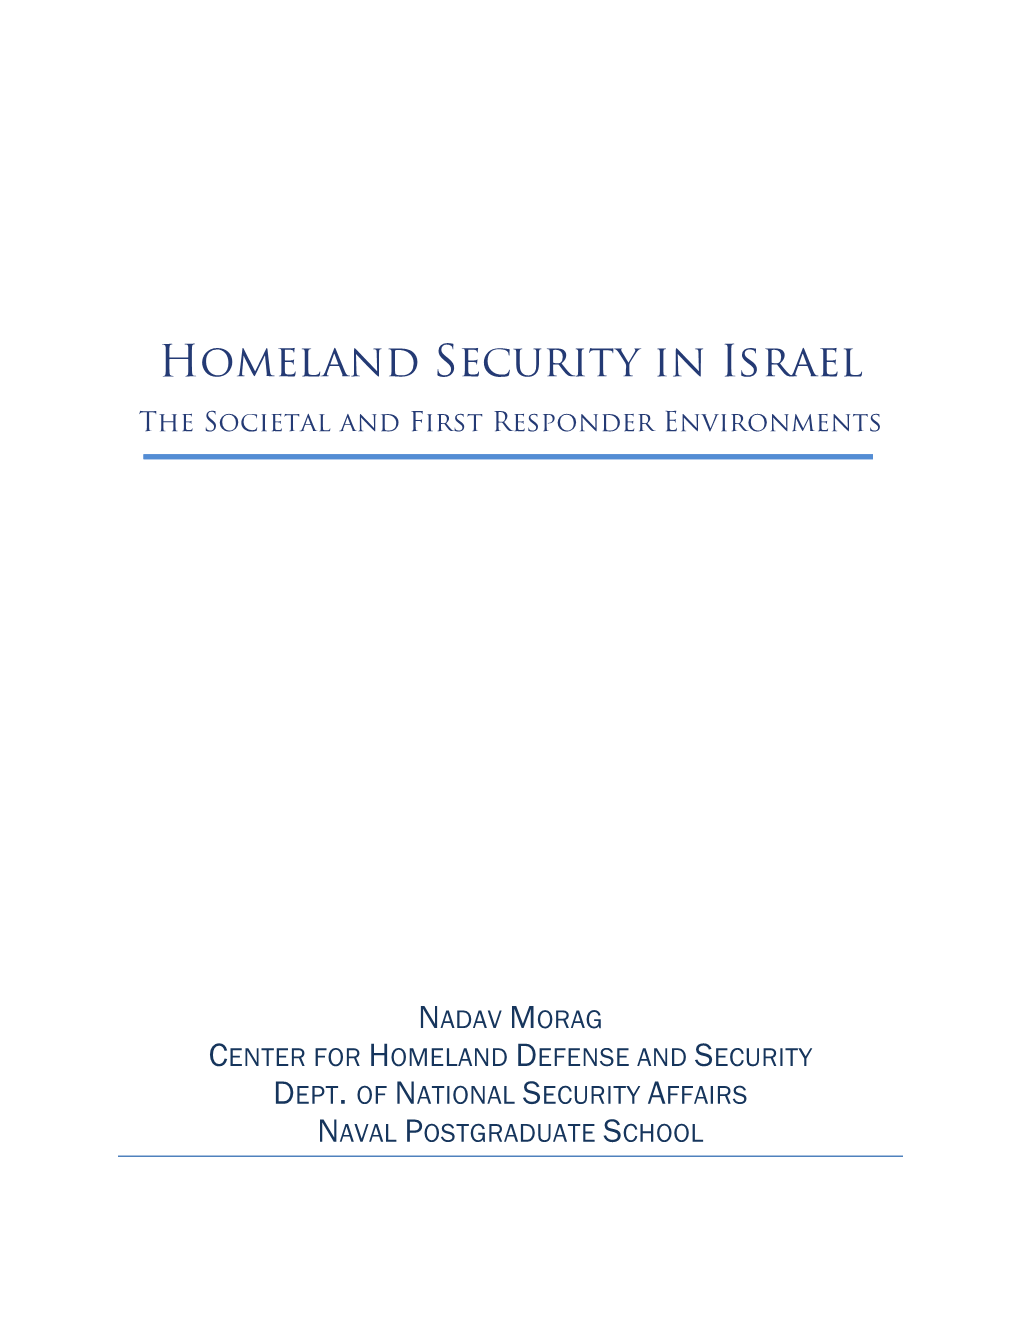 Homeland Security in Israel the Societal and First Responder Environments